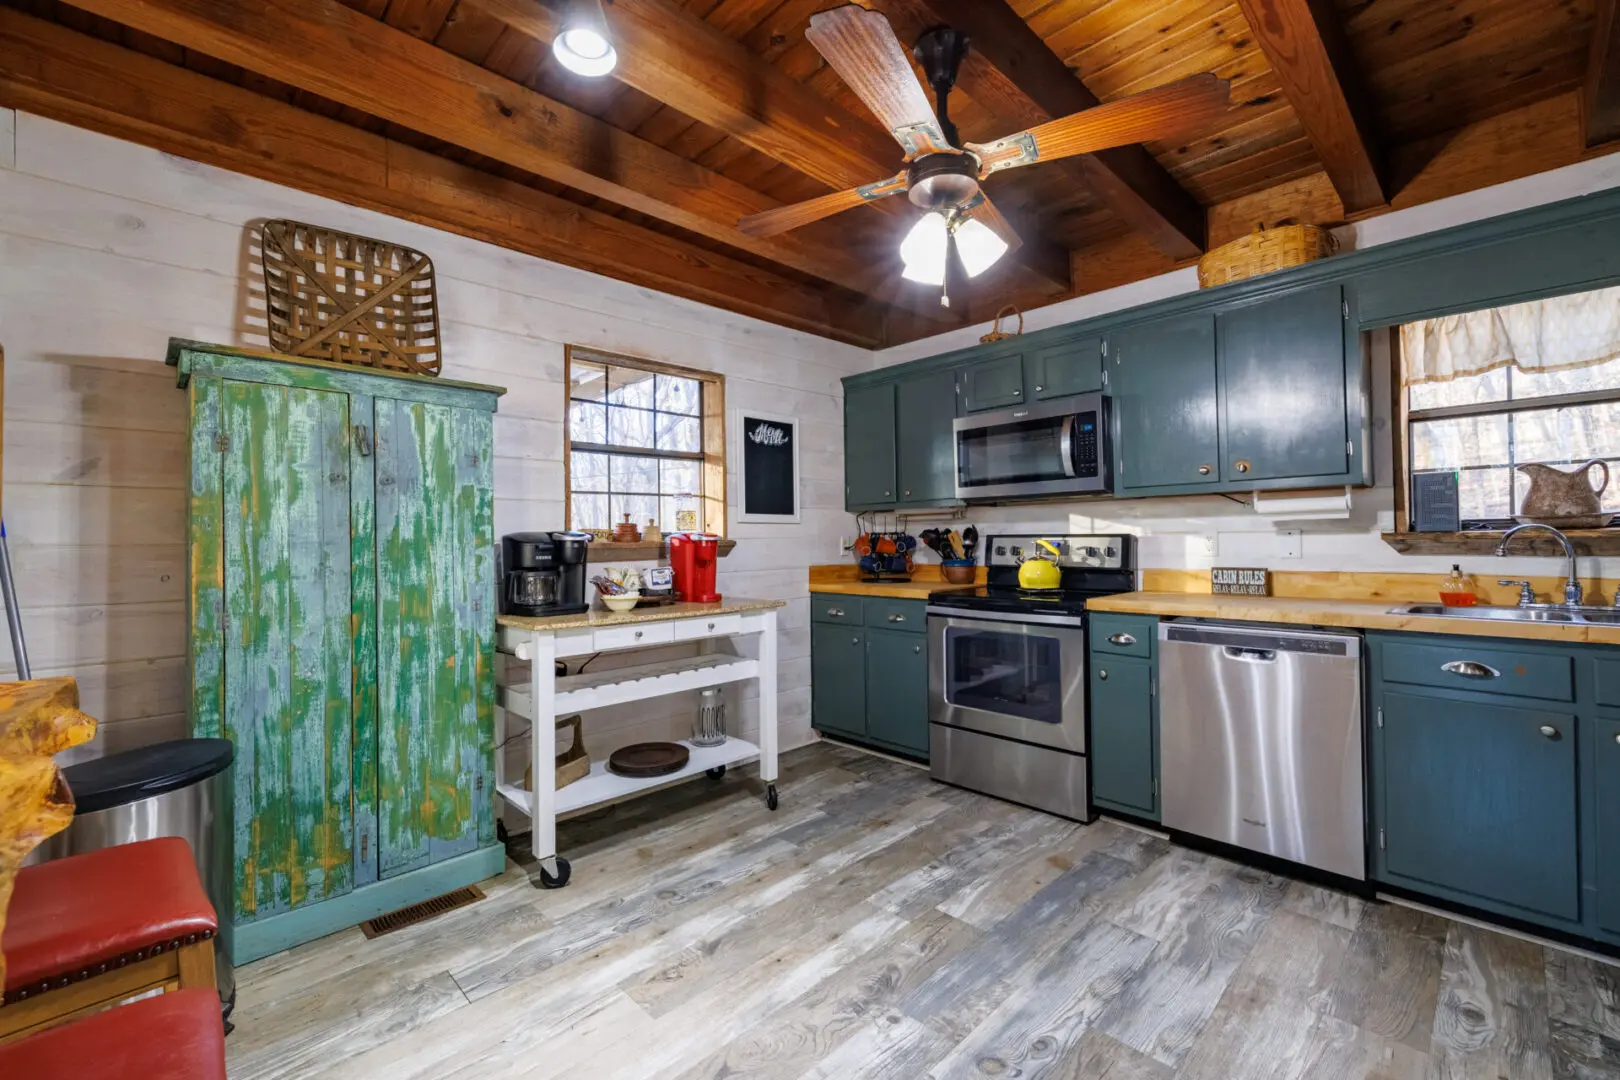 A vacation kitchen in a cabin with wood floors and a ceiling fan.